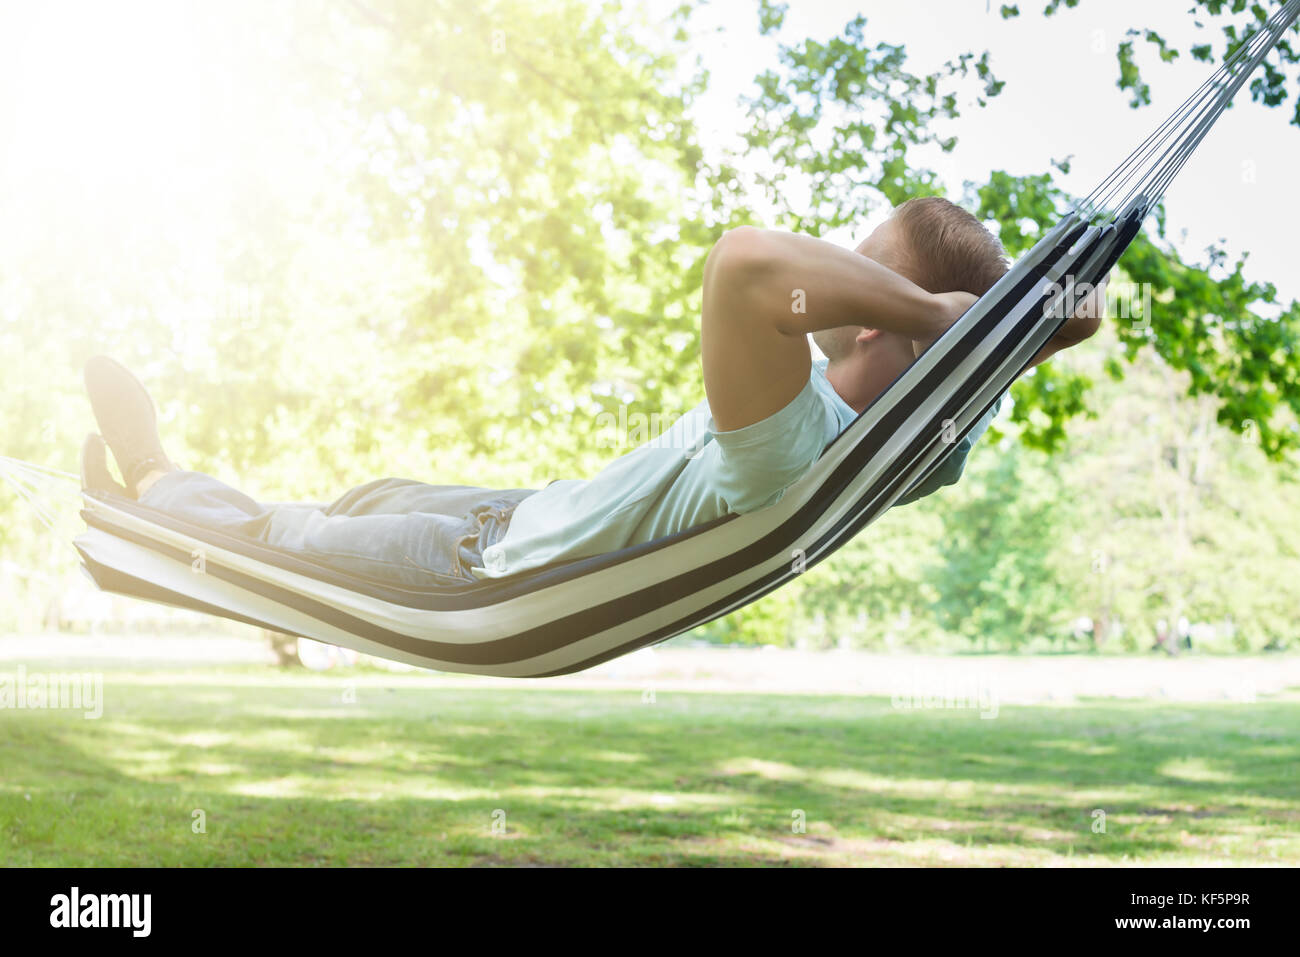 Young Man Relaxing In Hammock At Park Stock Photo